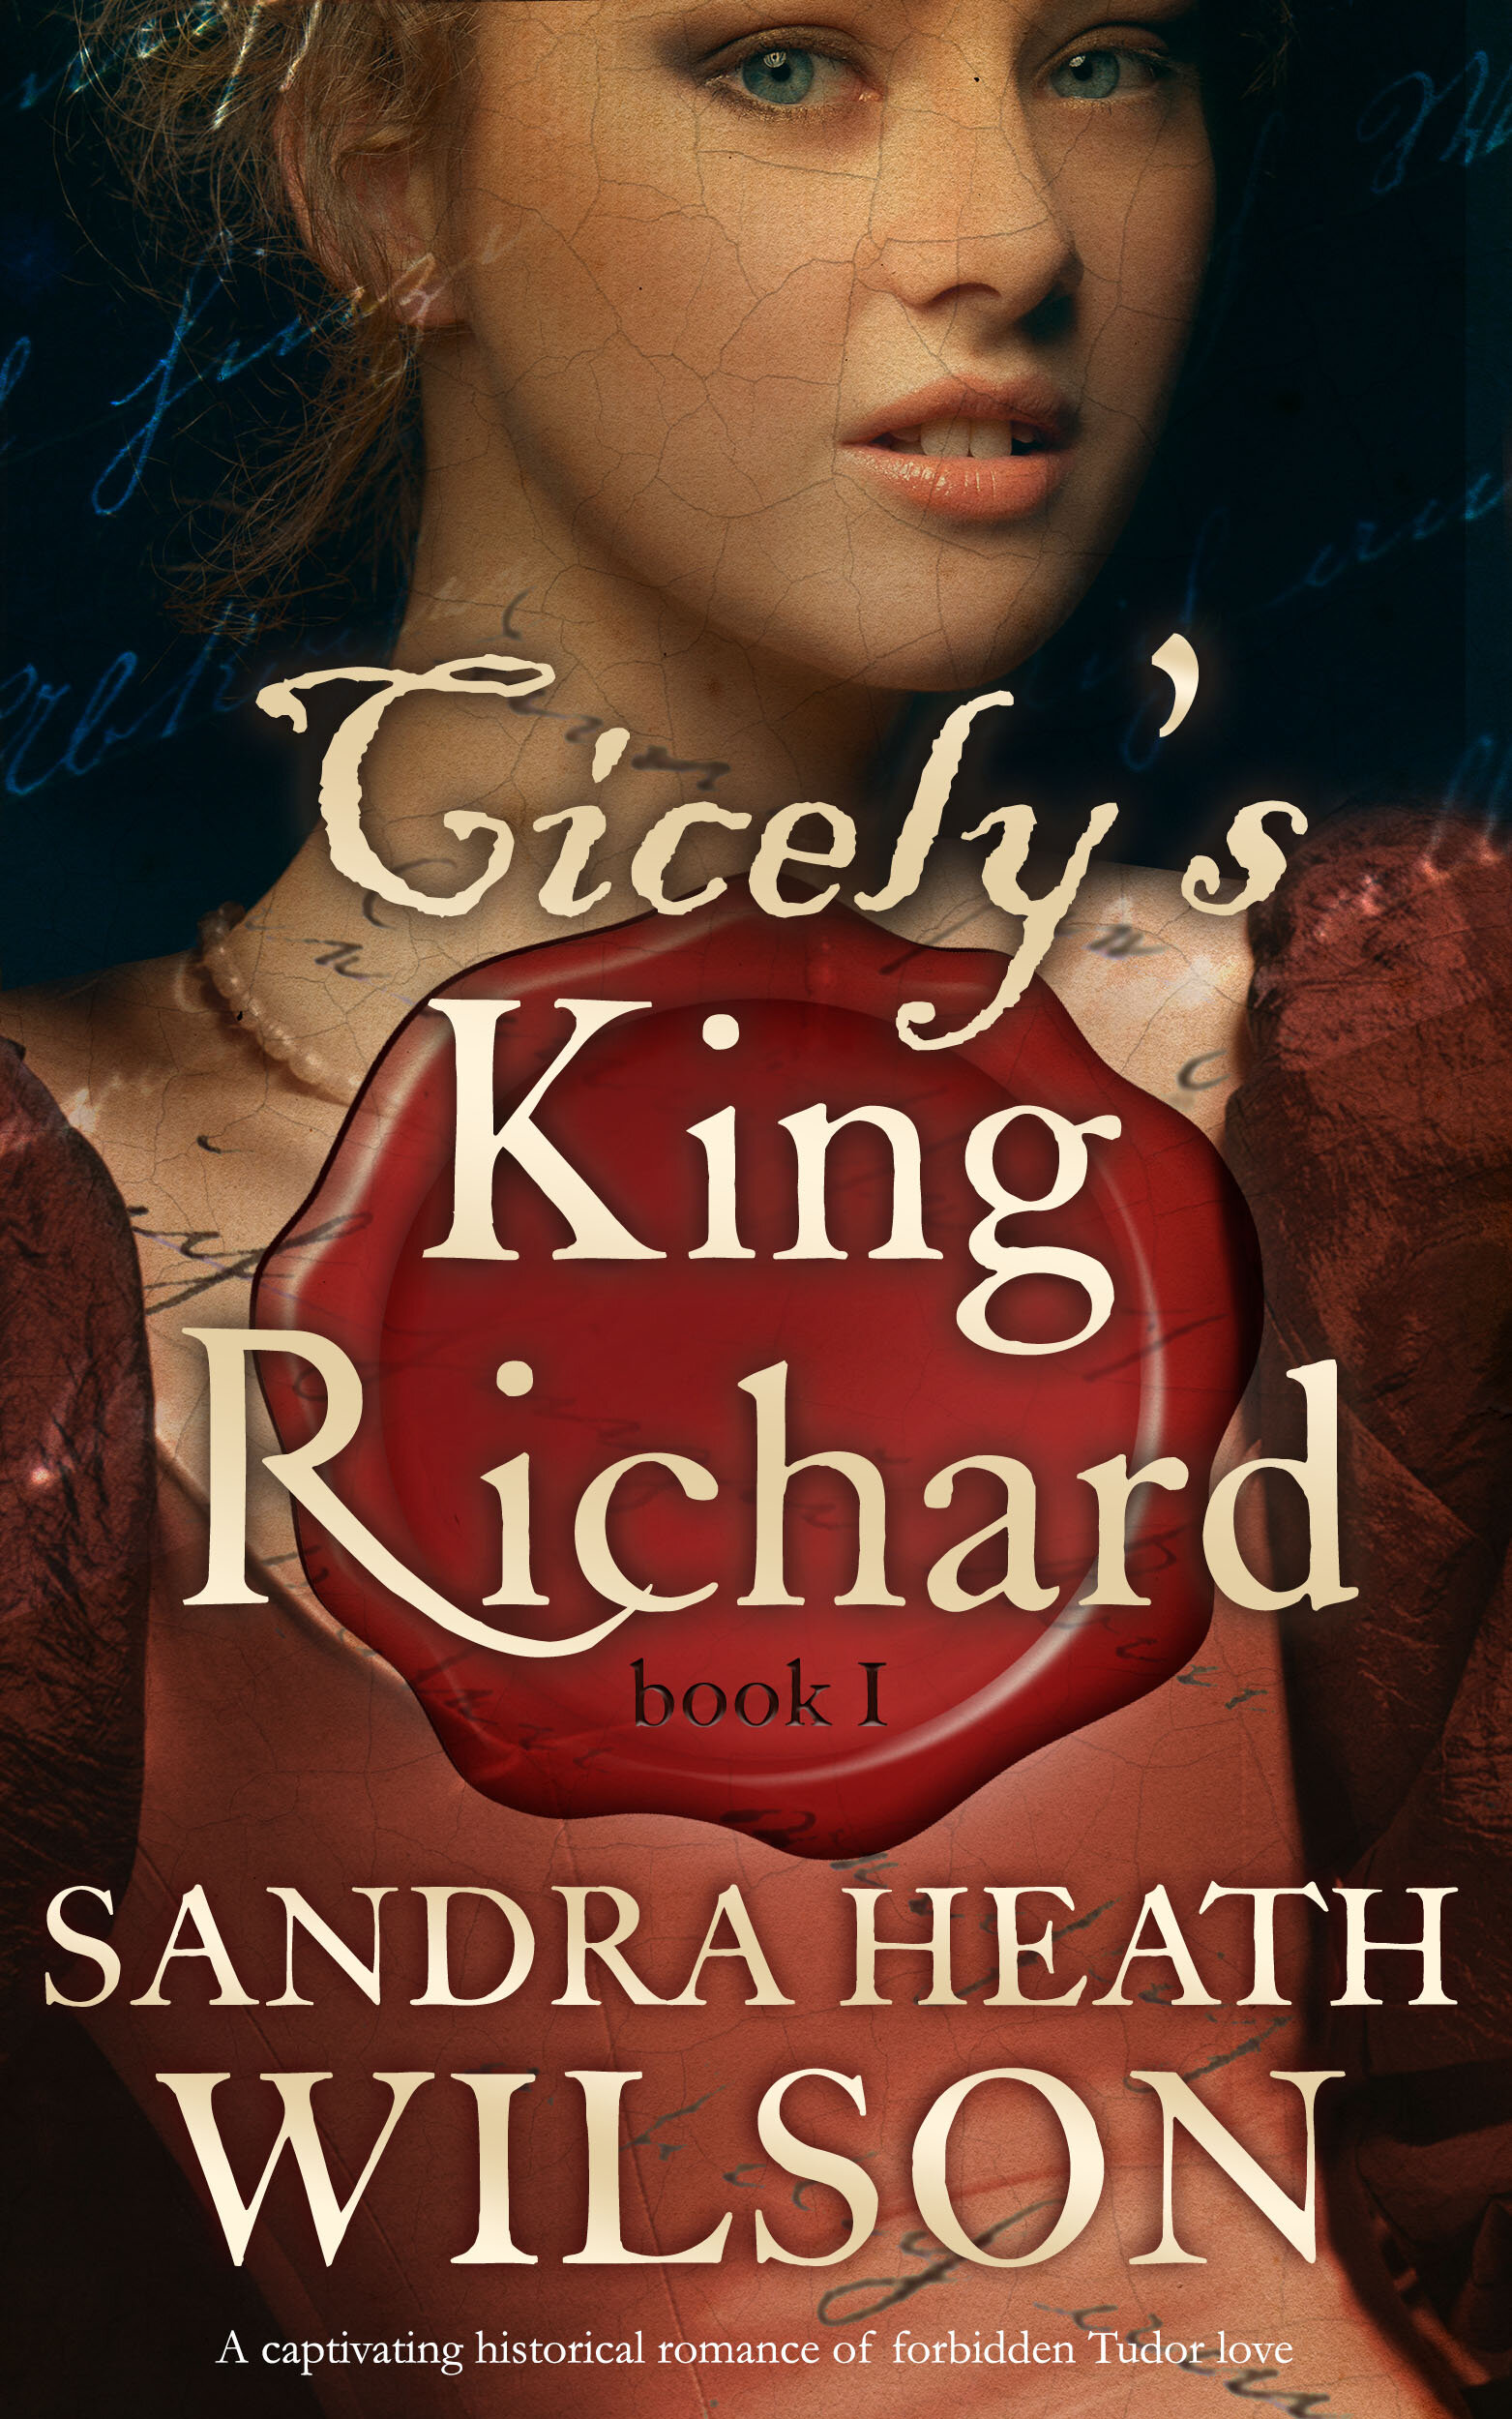 Cicely's King Richard publish cover with tagline.jpg